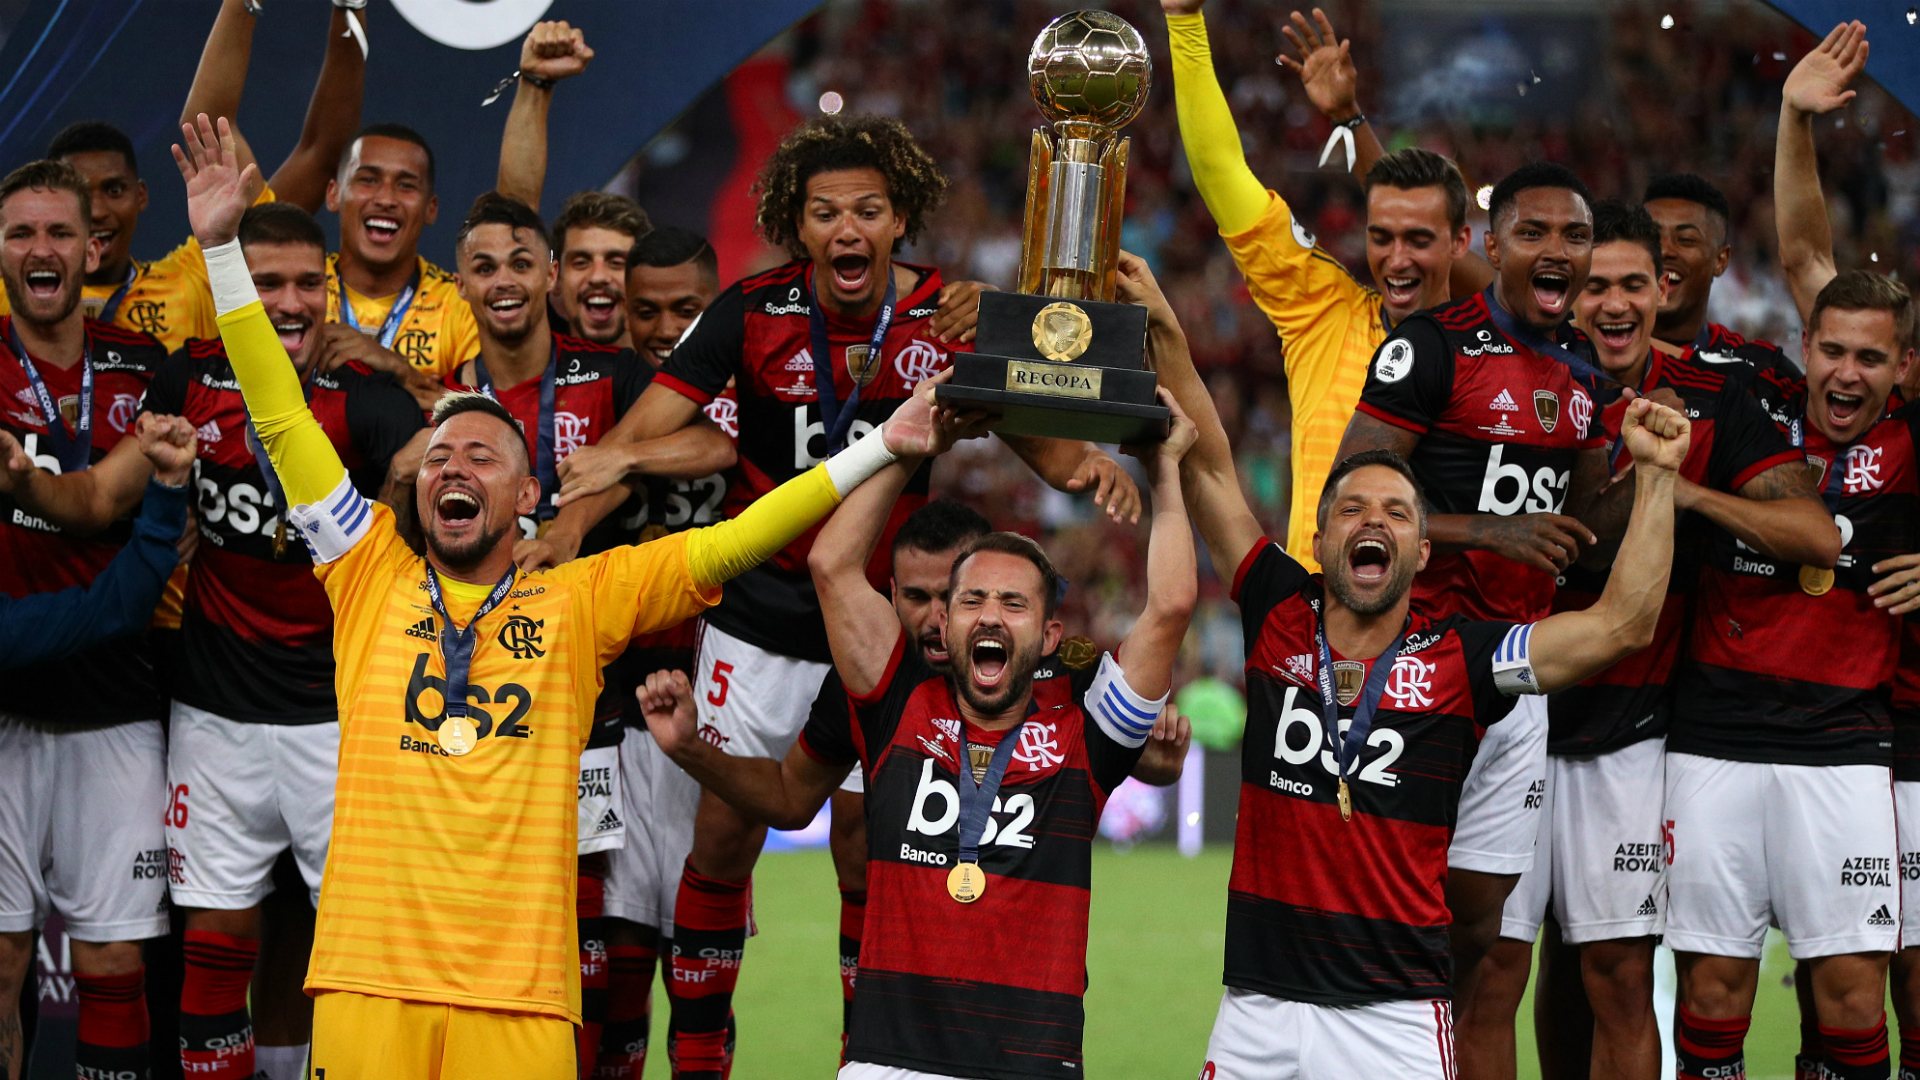 All-conquering Flamengo have taken South America by storm under head coach Jorge Jesus and they won another trophy on Wednesday.